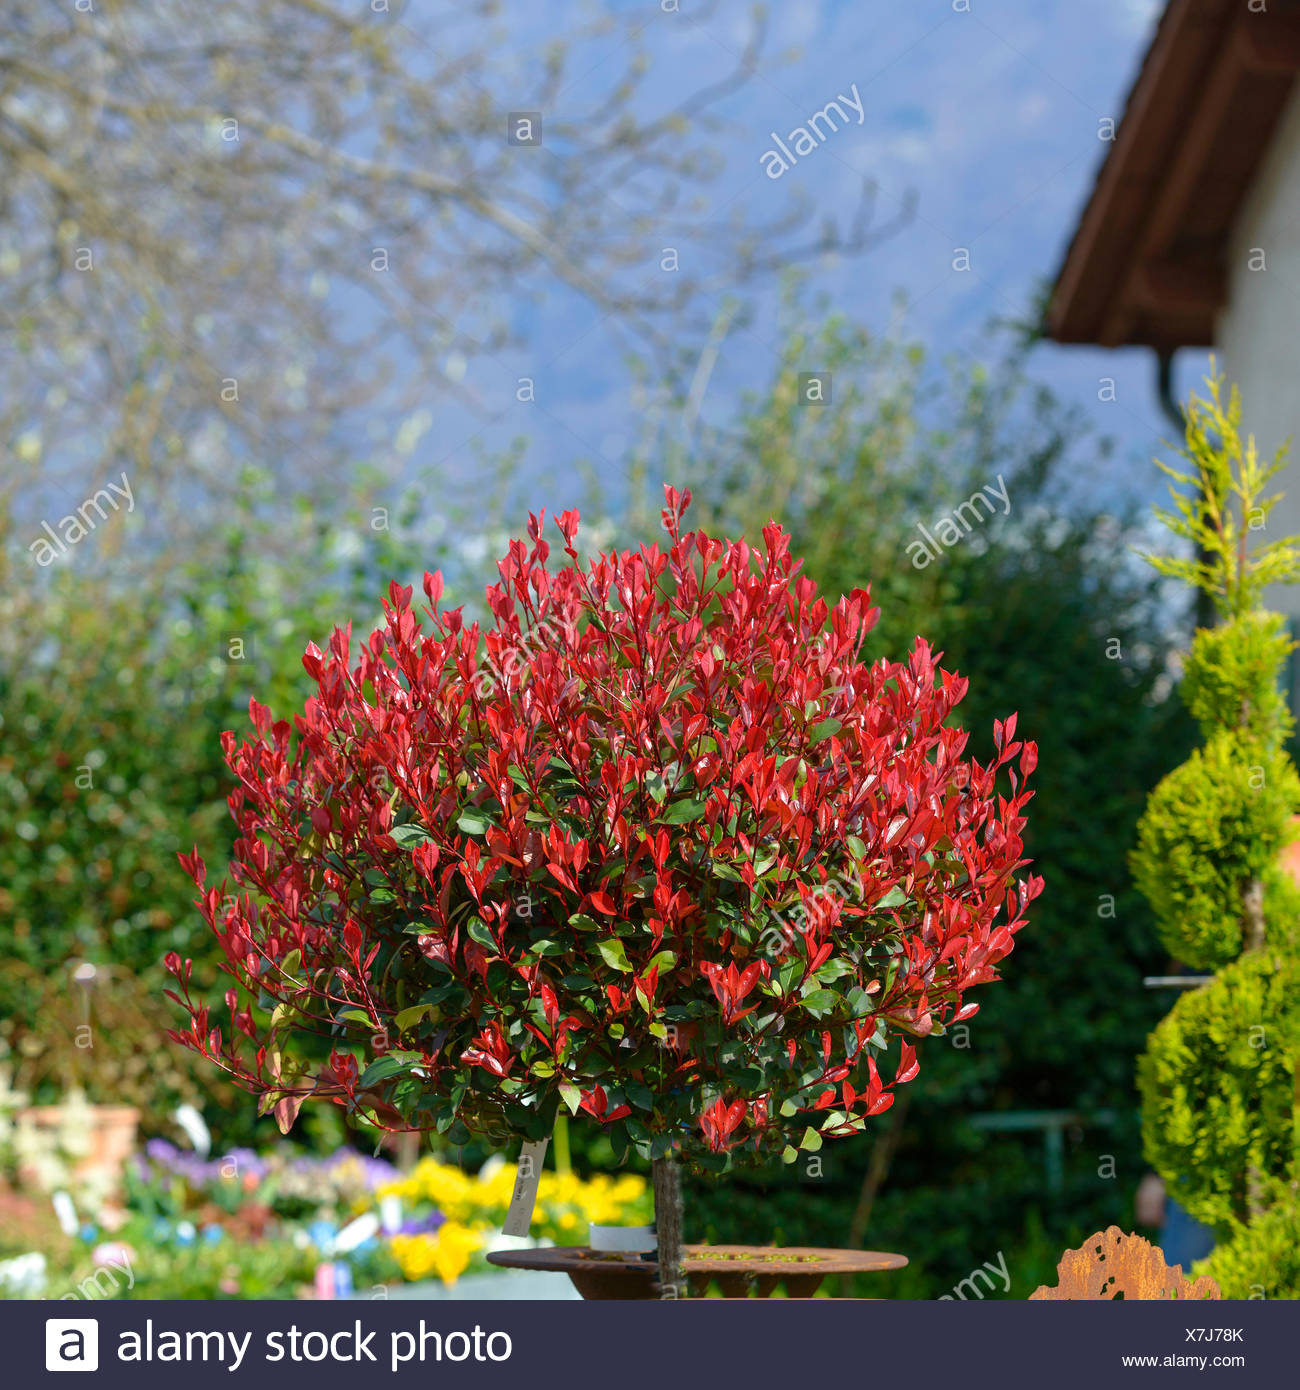 Garden Bloggers Blooms Day Photinia Red Robin